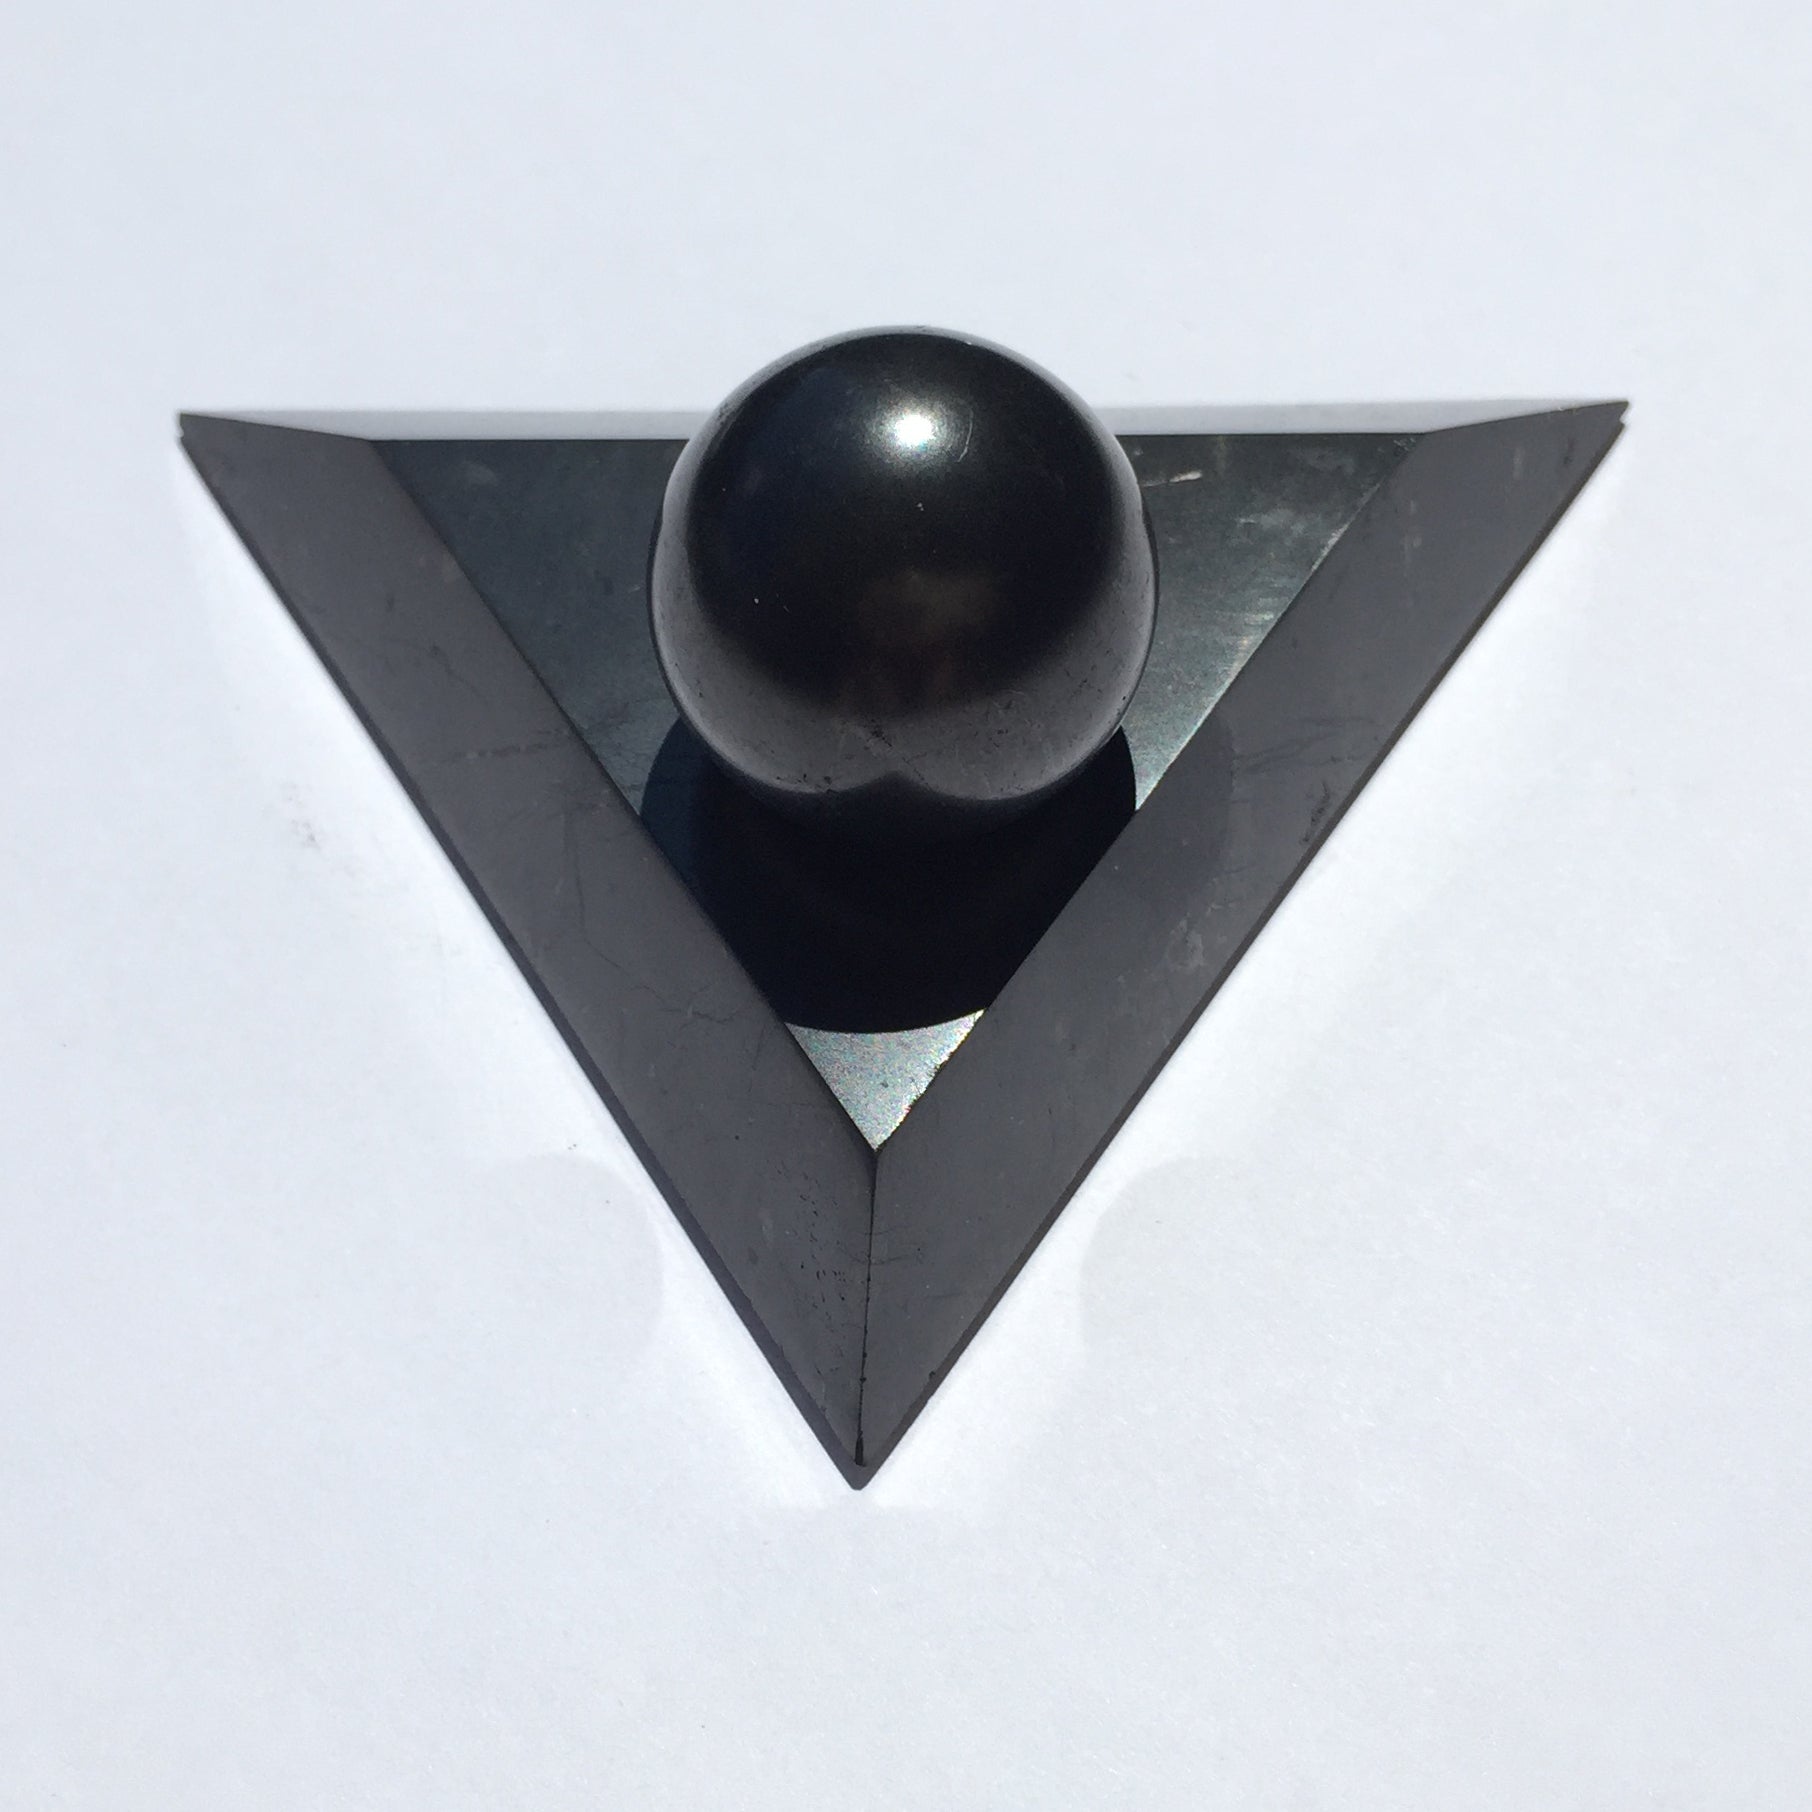 Small Decorative Triangular Stand for Sphere/Egg*